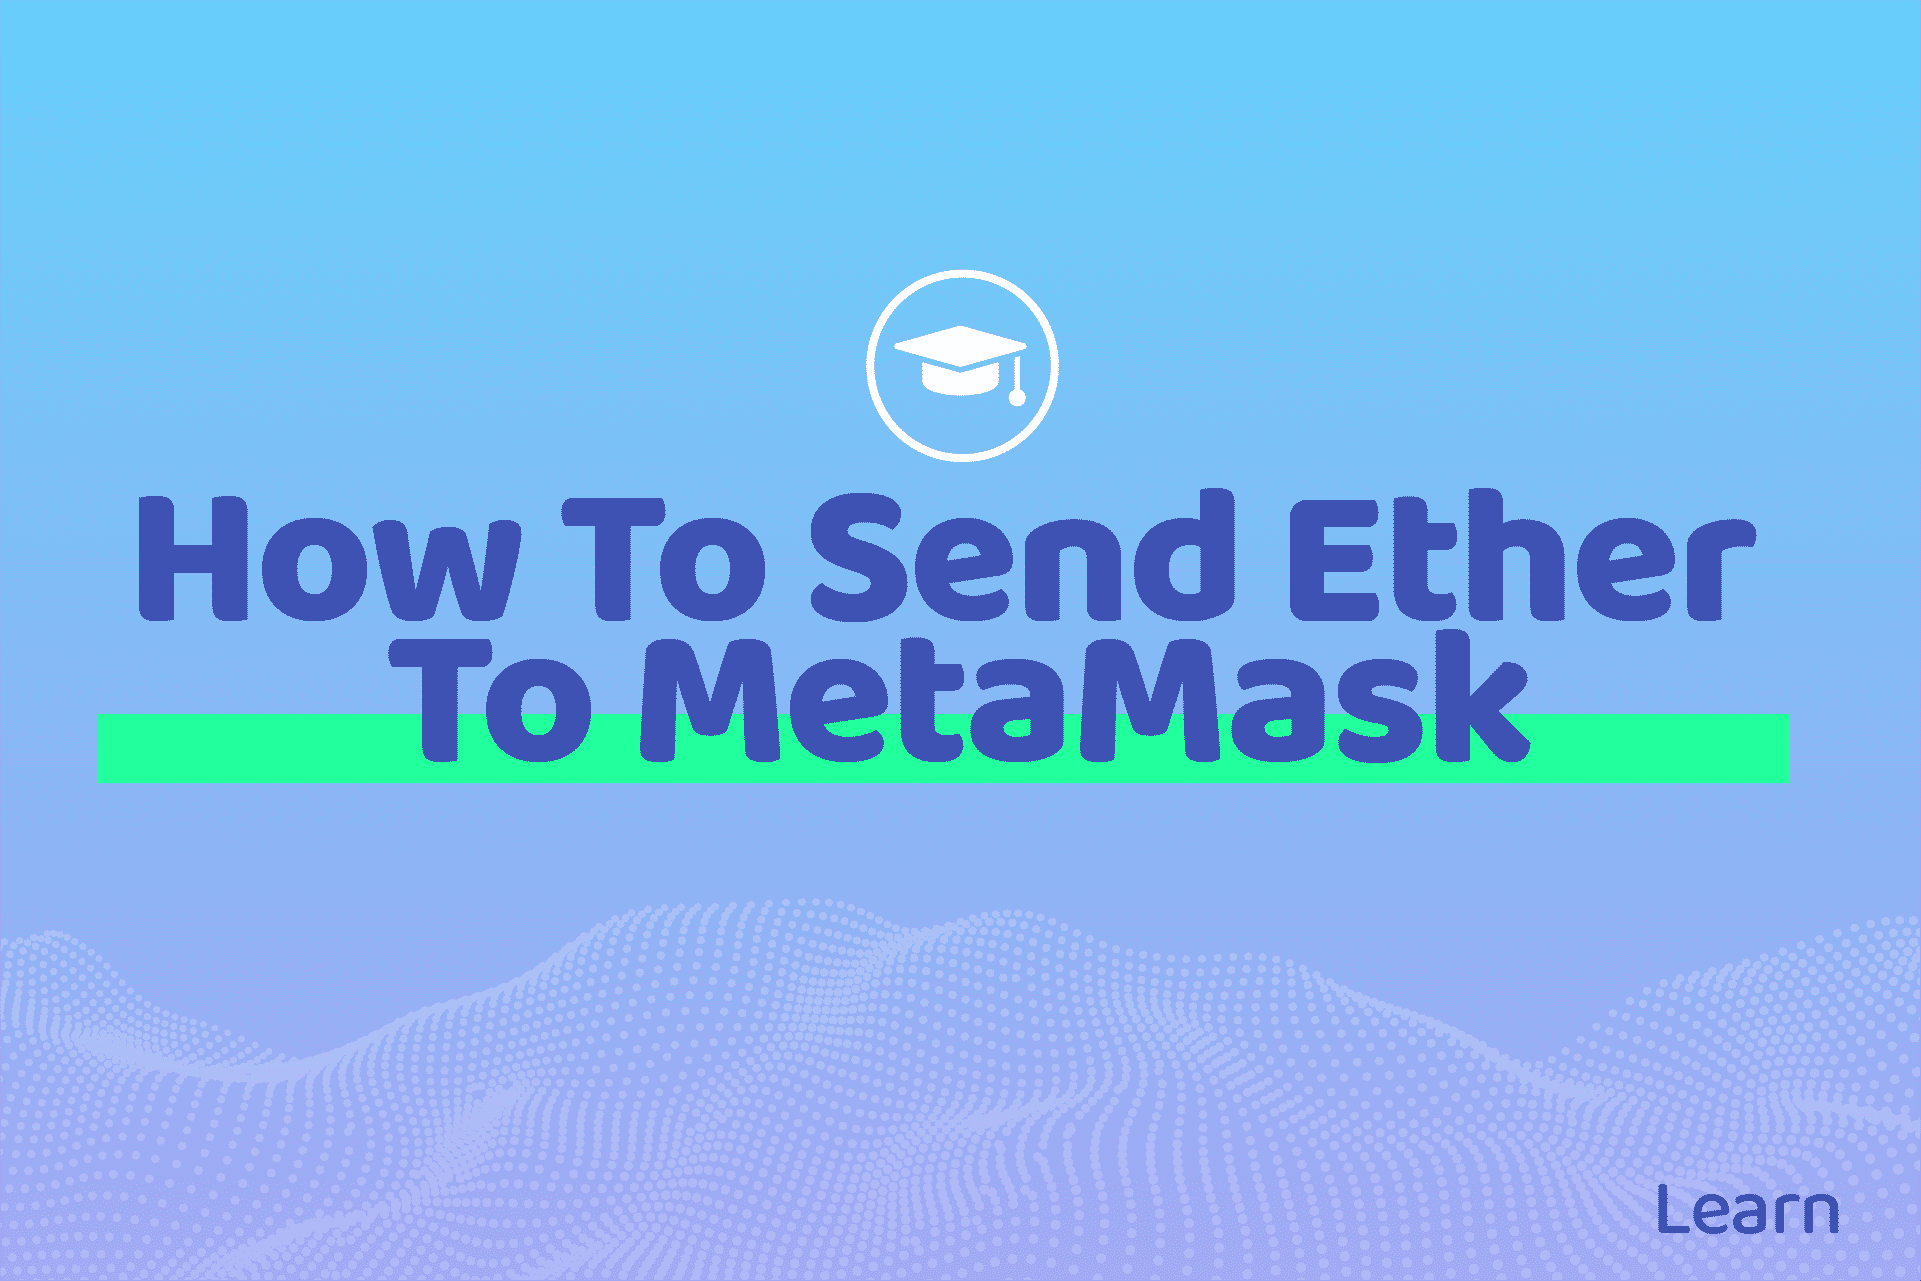 ether to metamask